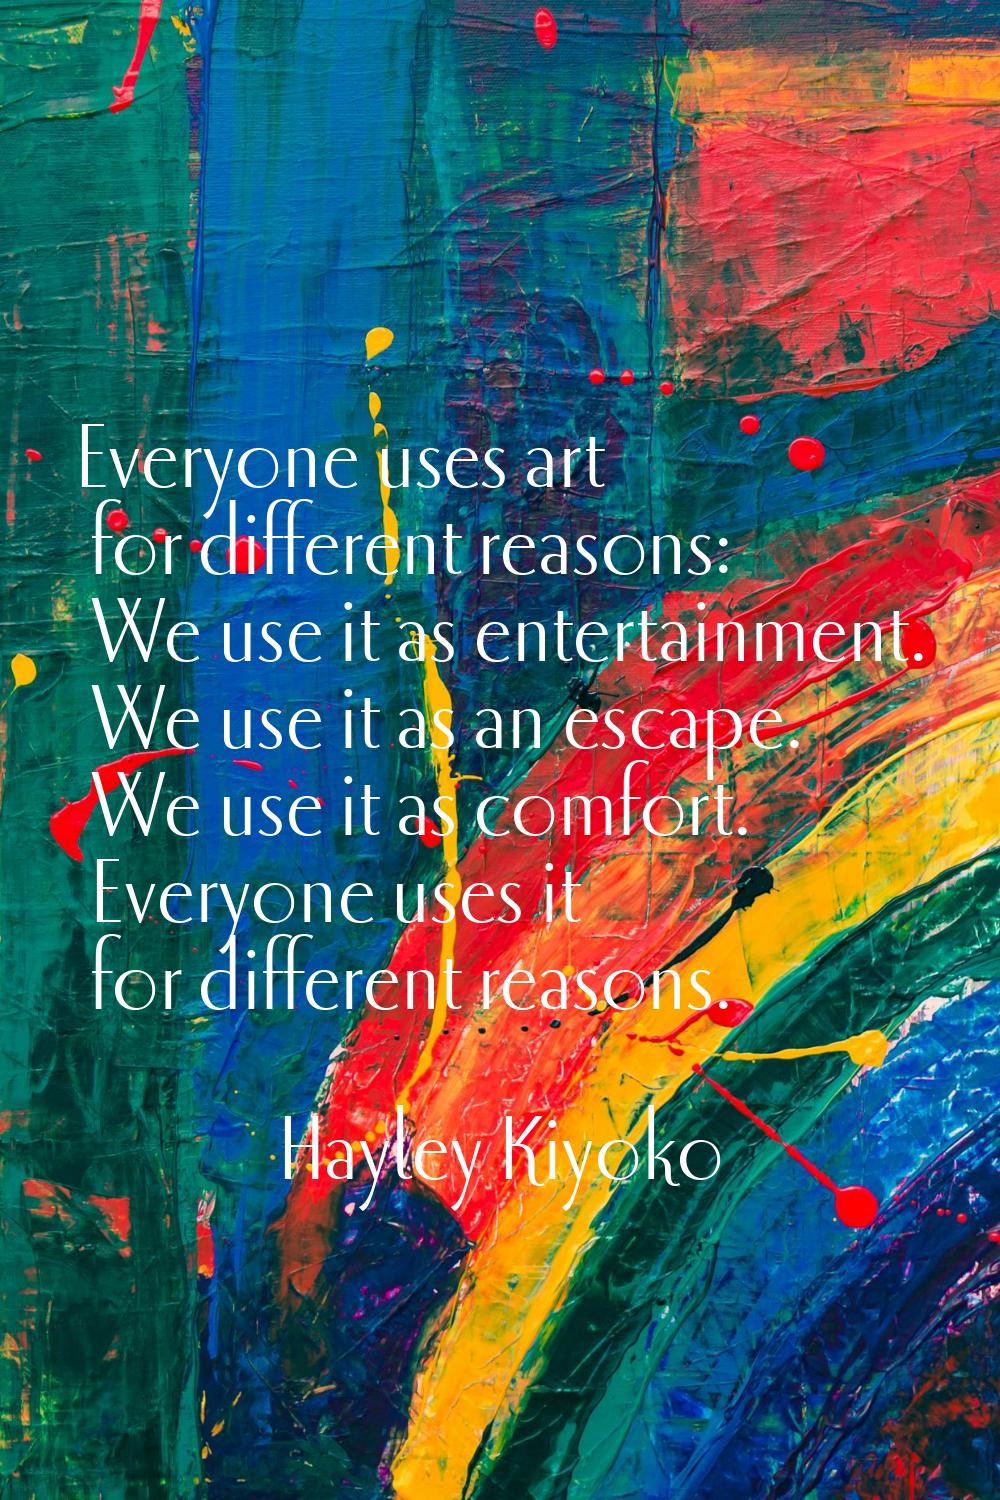 Everyone uses art for different reasons: We use it as entertainment. We use it as an escape. We use